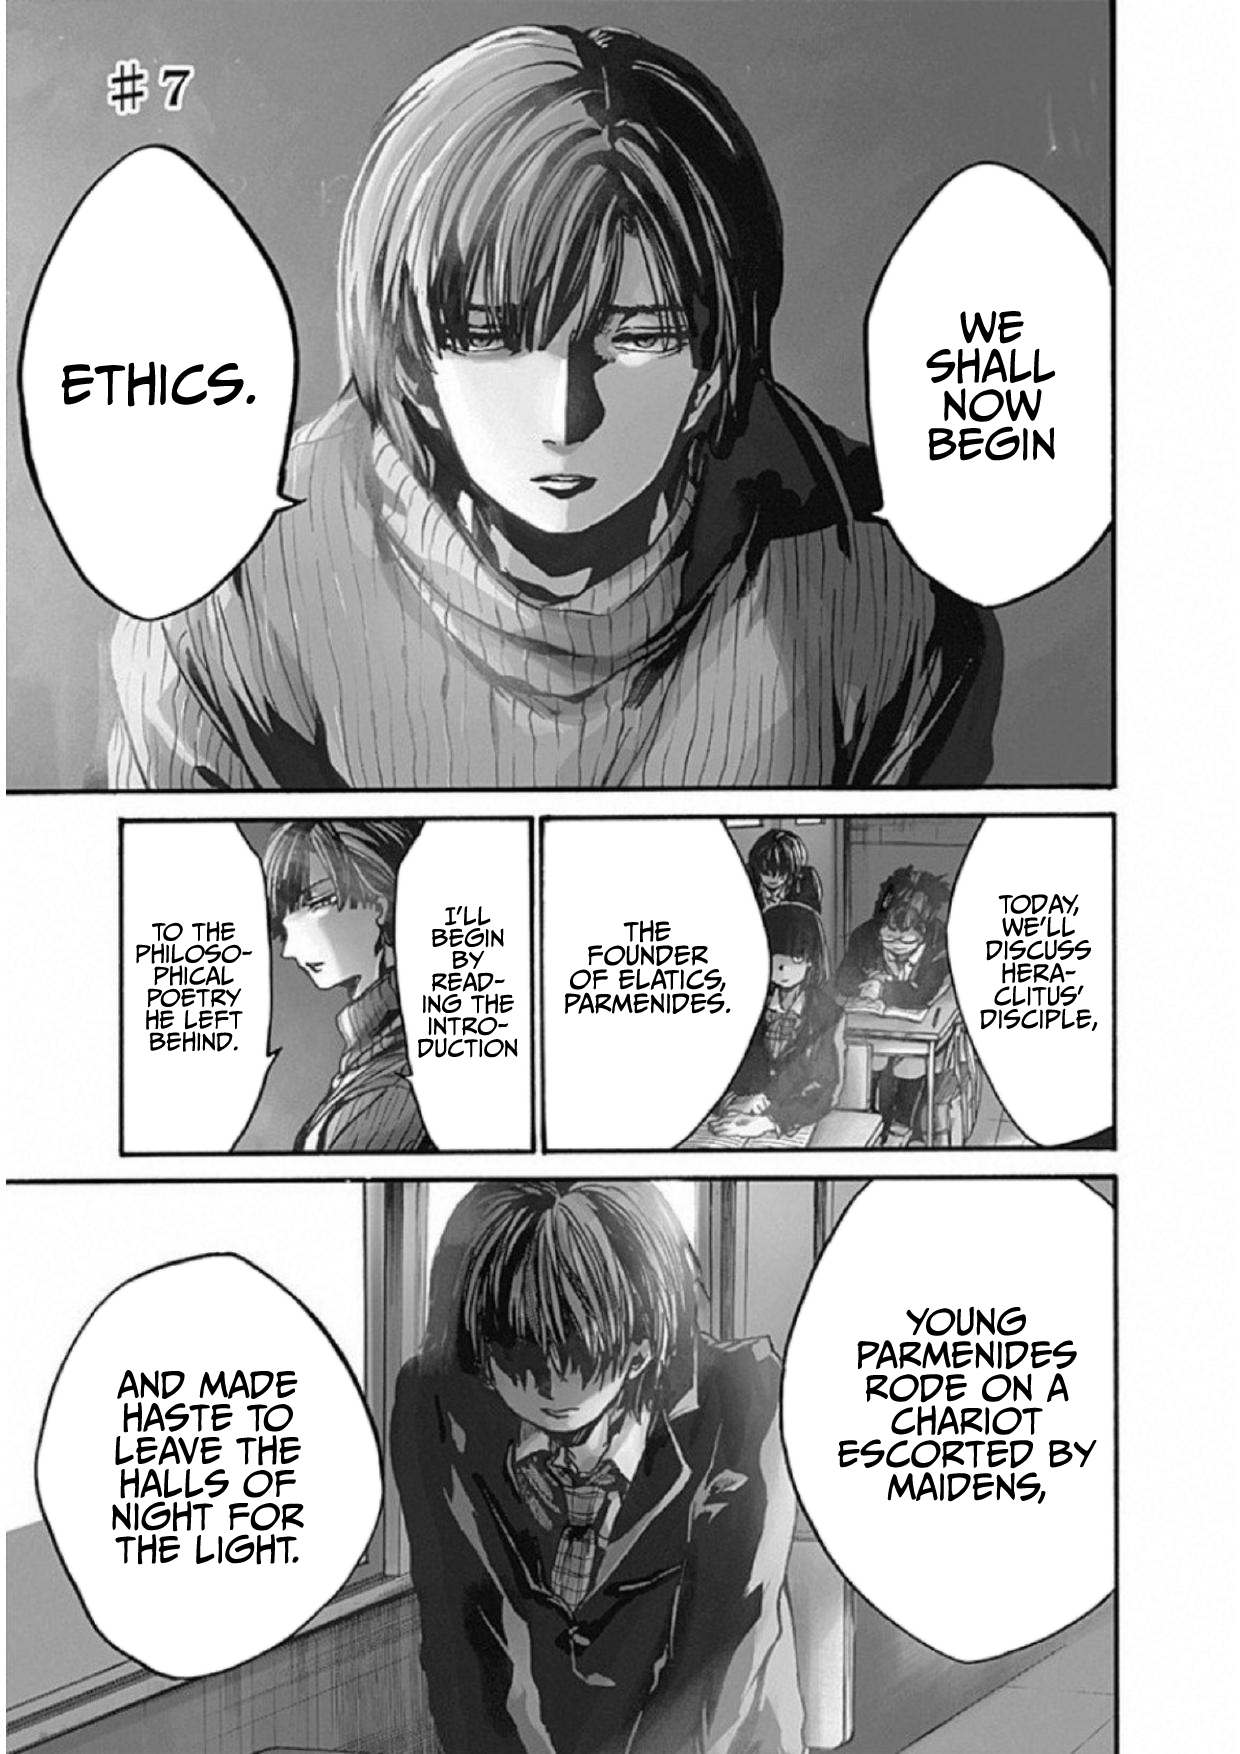 From Now On We Begin Ethics. - Page 1